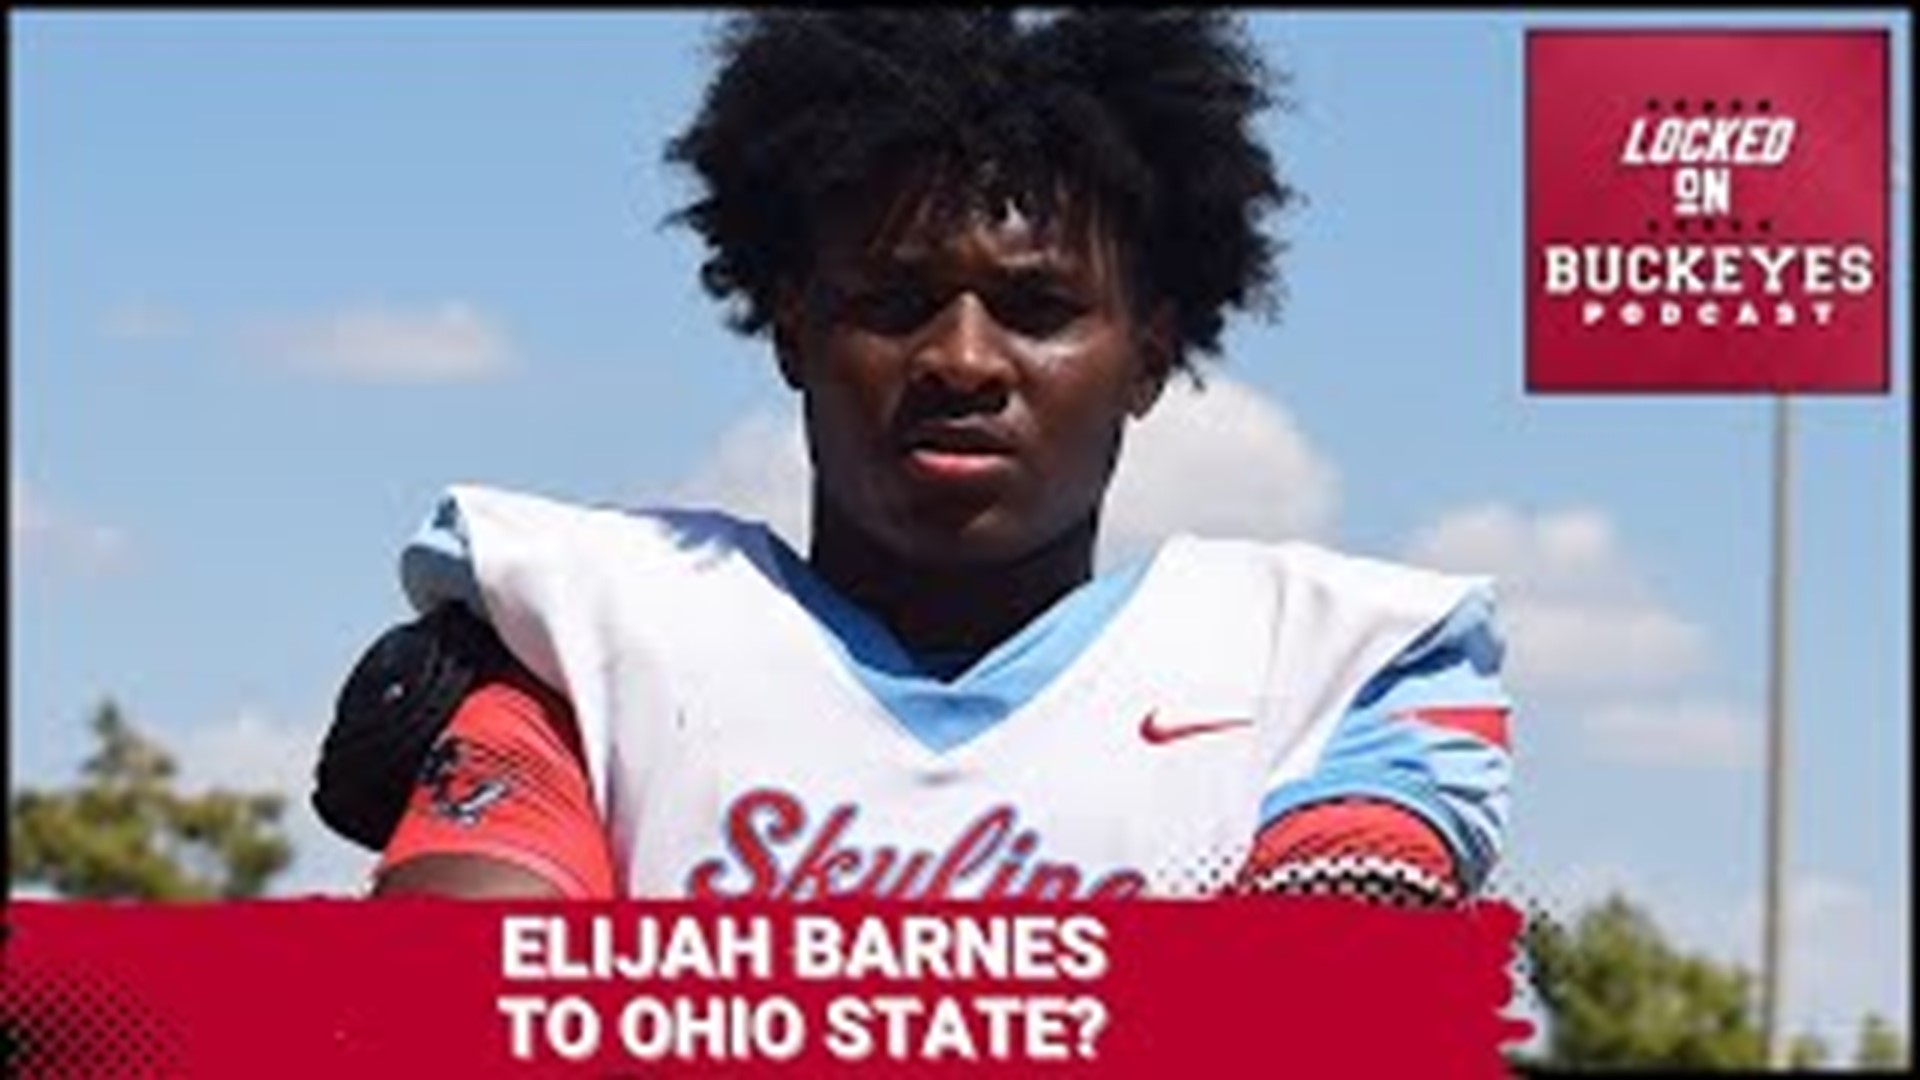 Ohio State is picking up steam on the recruiting trail. 4 star LB Elijah Barnes is one of the numerous players the Buckeyes' are trying to lure to Ohio State.